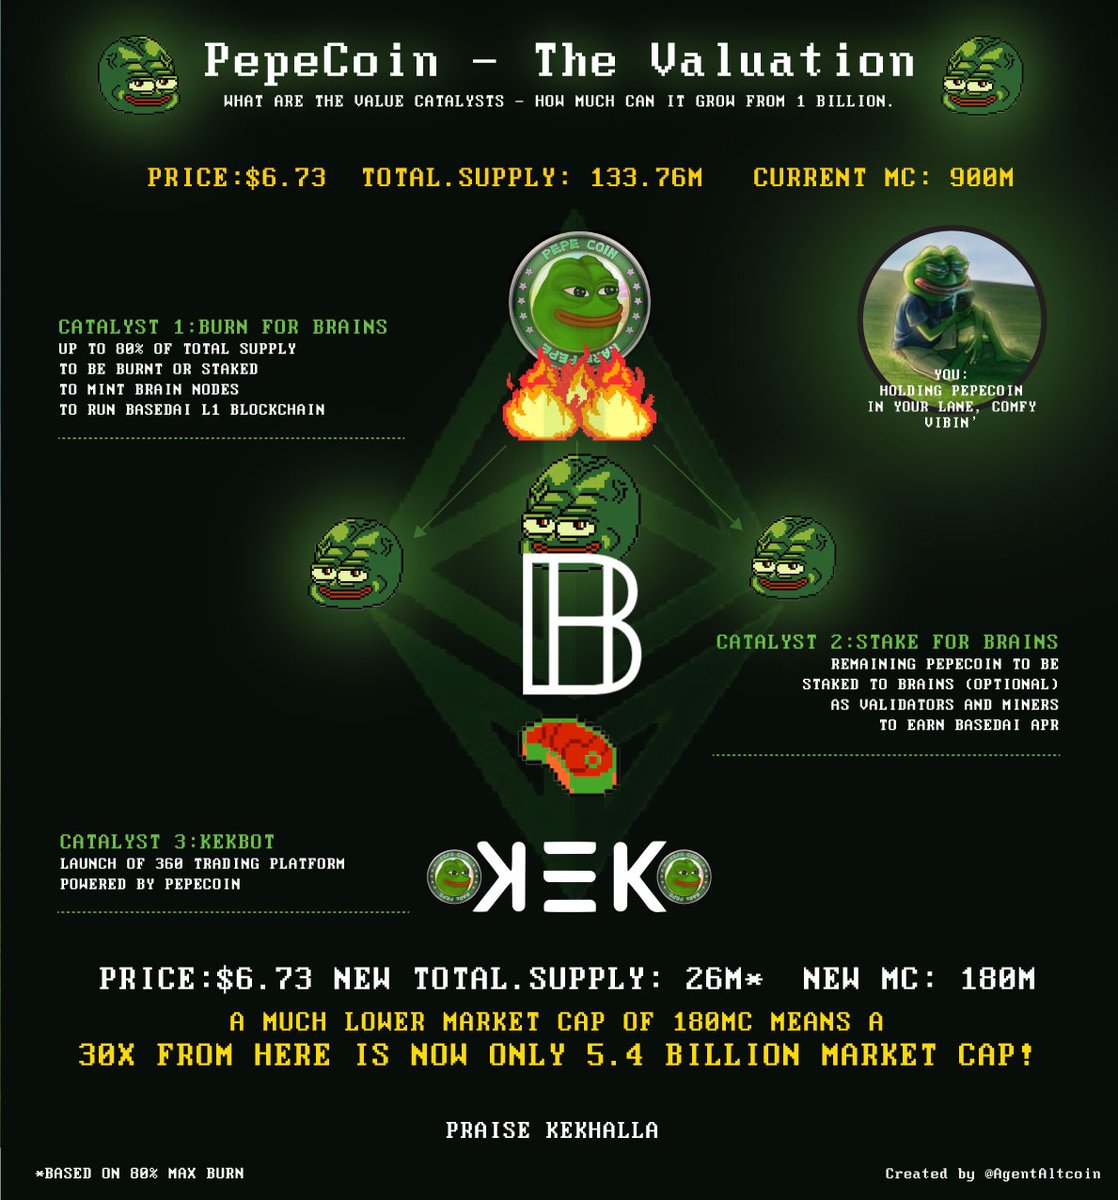 Now that @pepecoins  is hovering on the 1bn - 900 milly mark let's talk about valuations and price catalysts.

CATALYST 1: BURN FOR BRAINS
Up to 80% burn of Pepecoin total supply in order to mint Brains via brain credits. 
Massive supply reduction, from 133.76m to 26m creates…